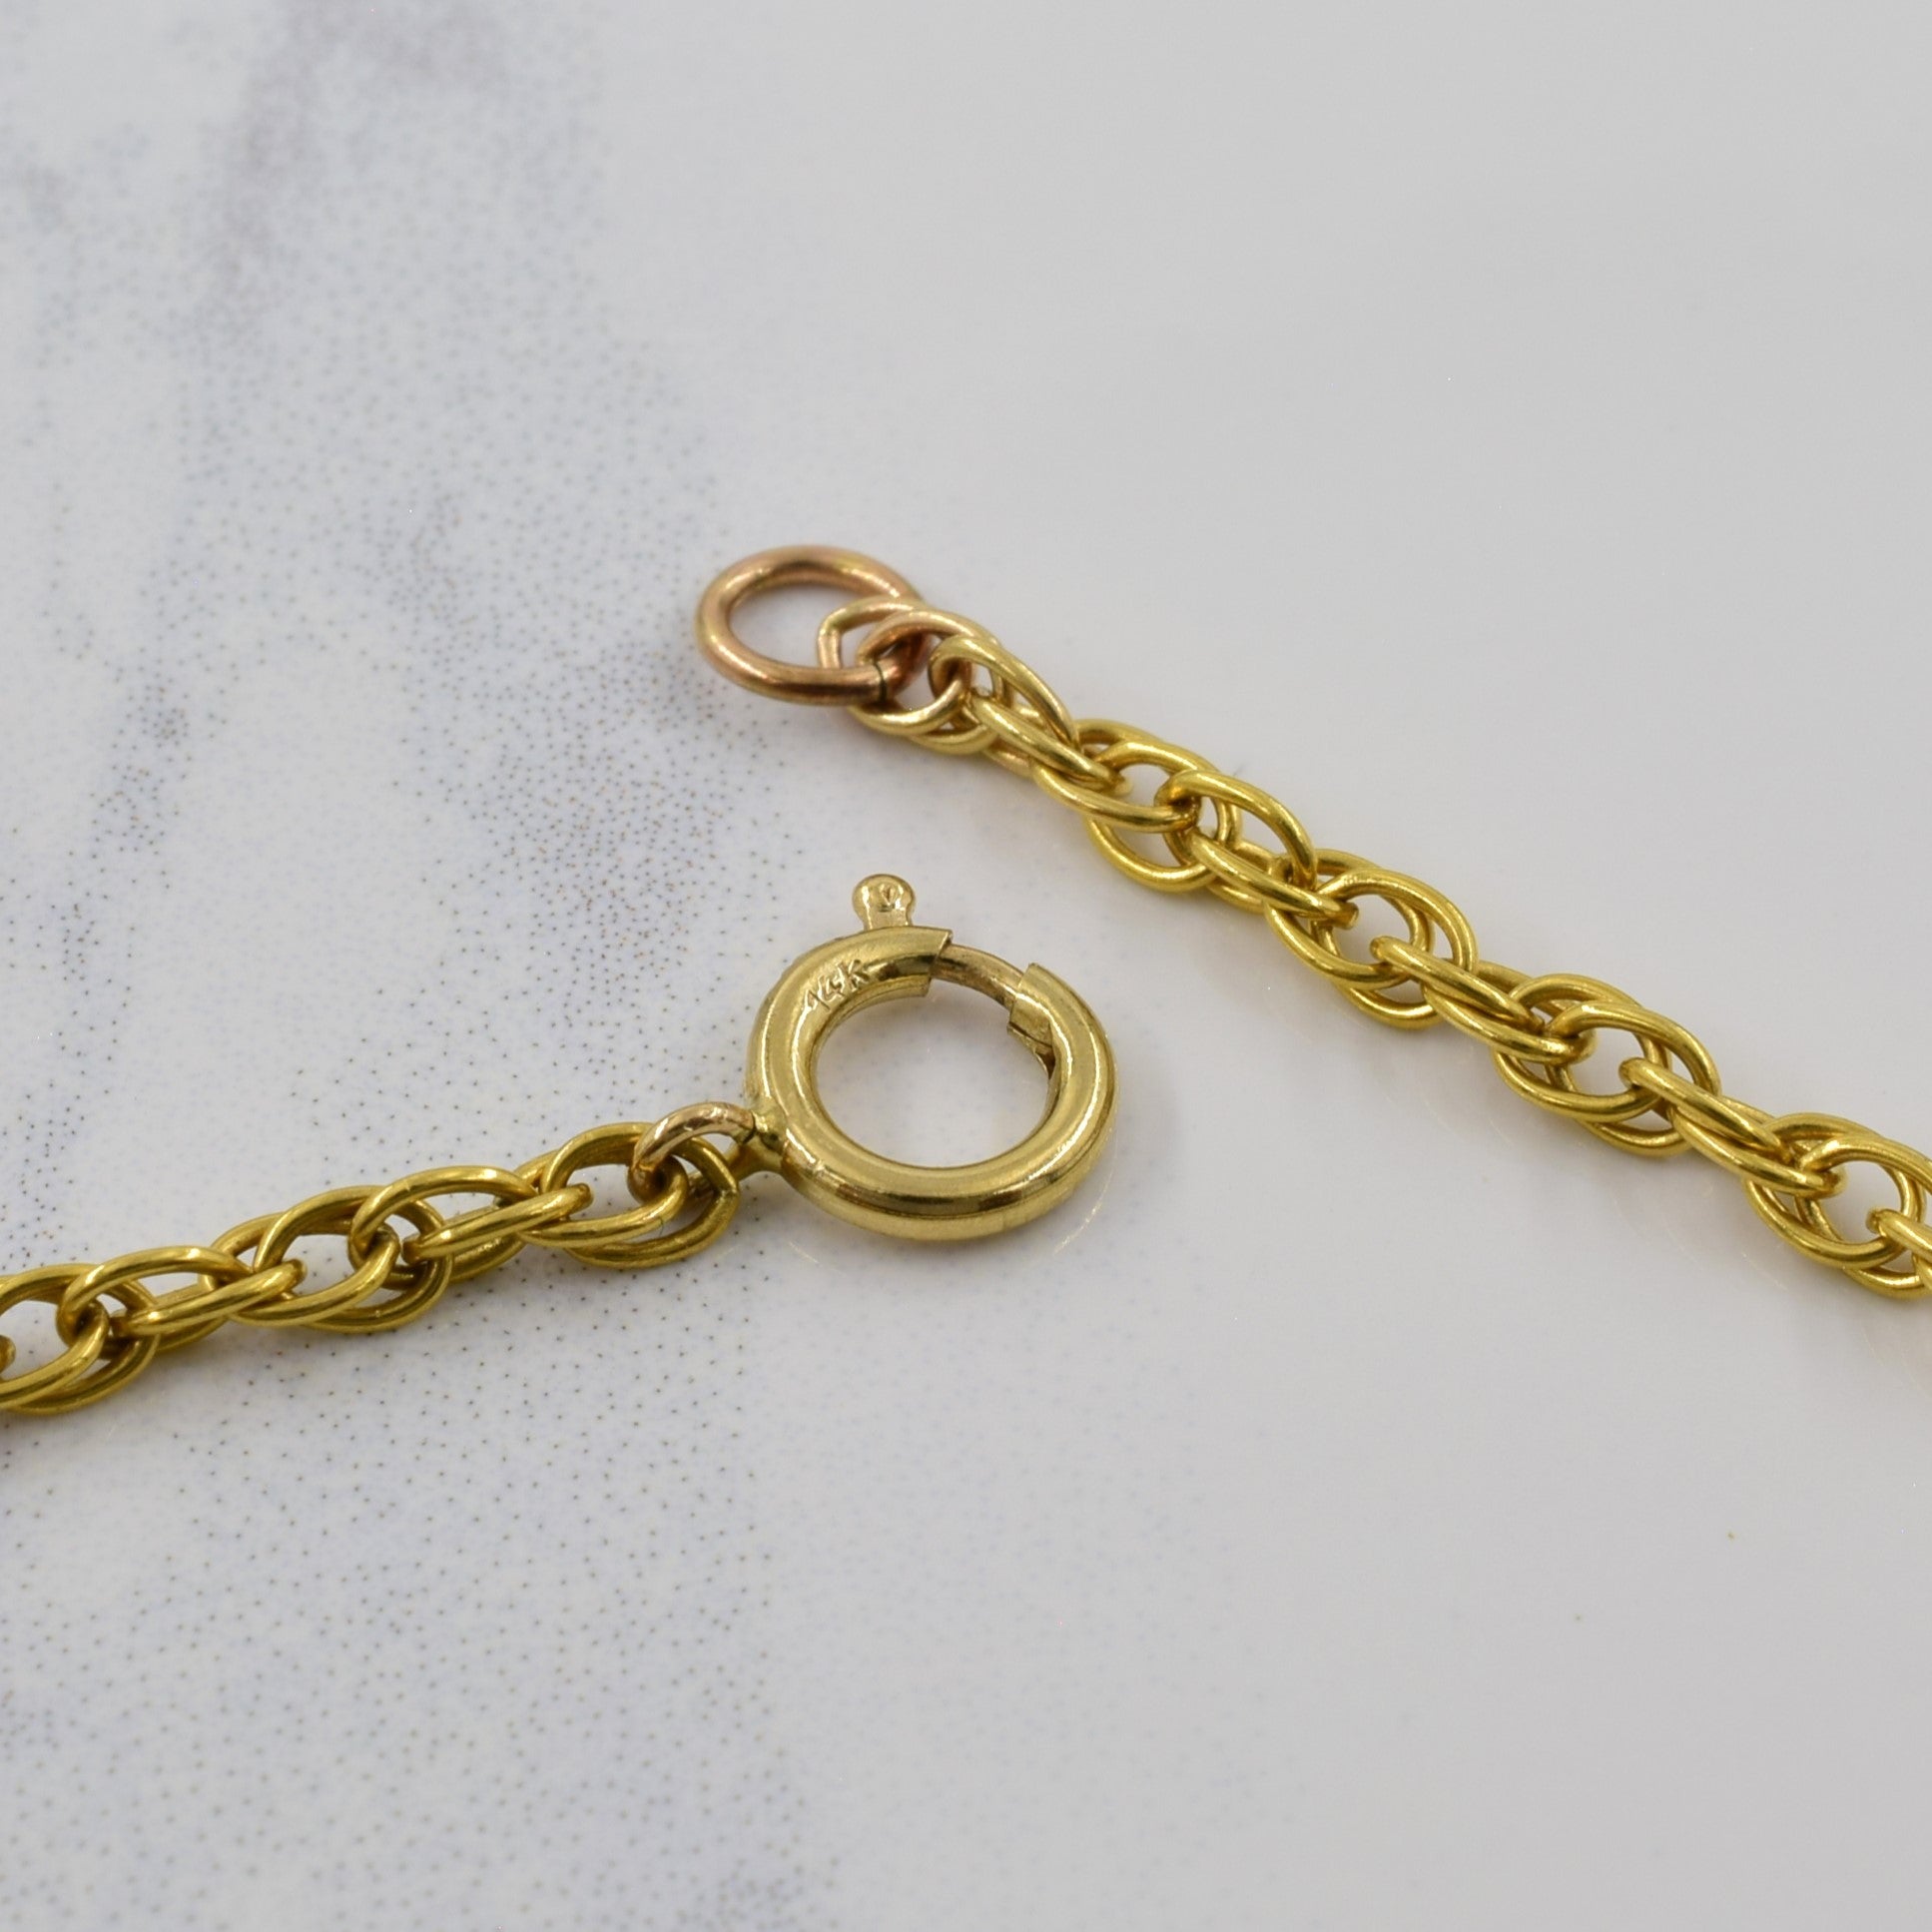 14k Yellow Gold Prince of Wales Chain | 24